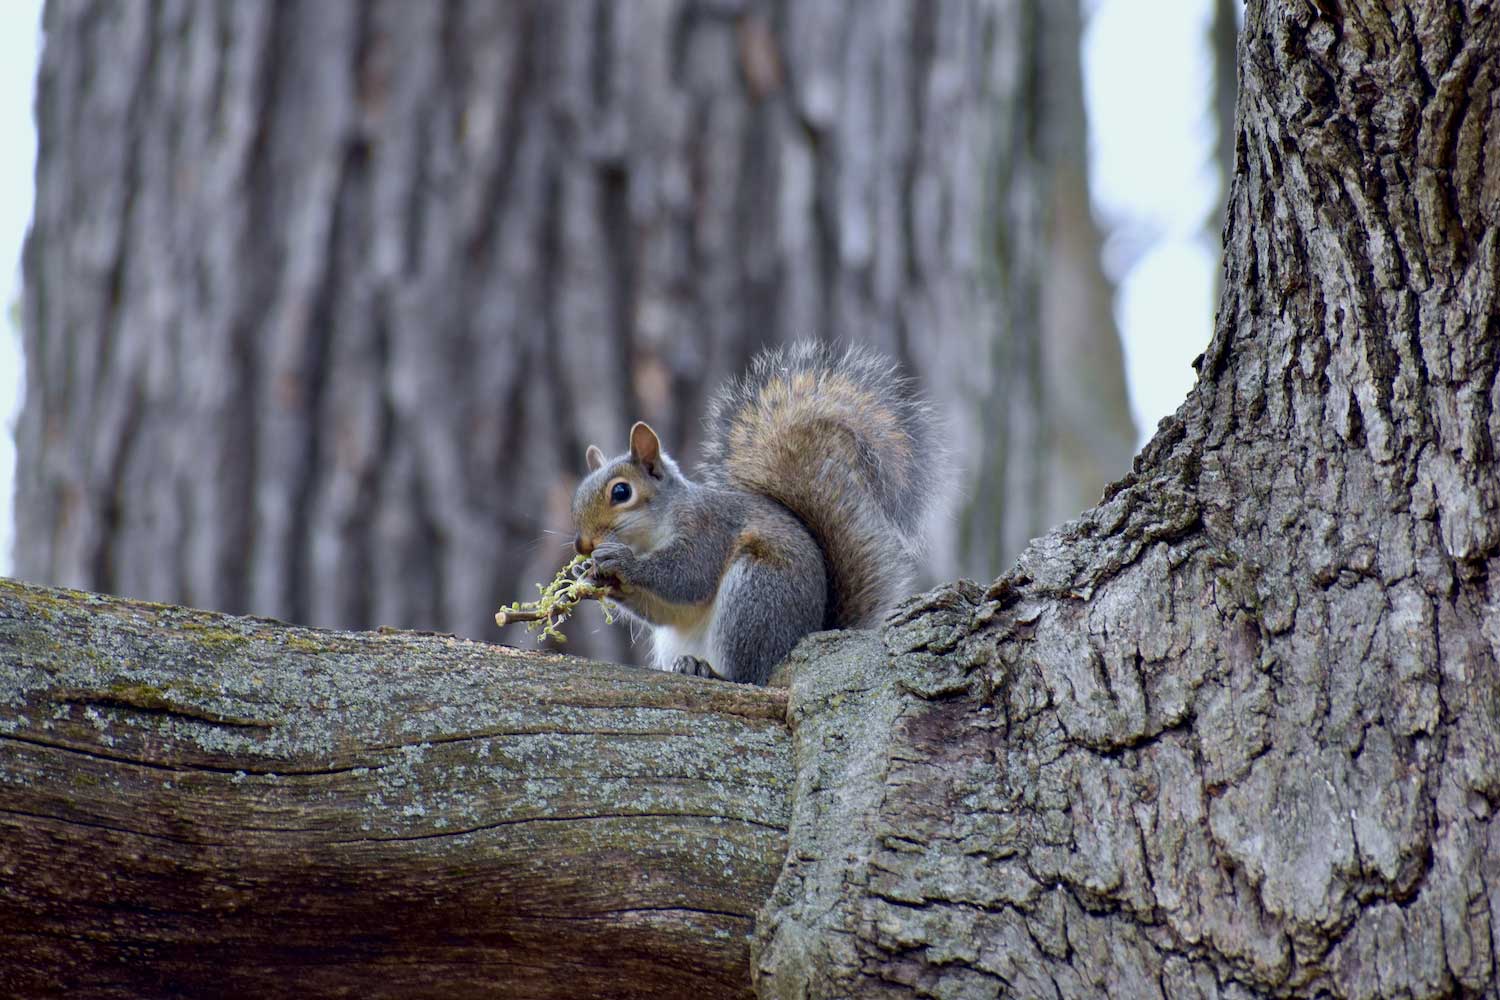 A squirrel eating while sitting on a tree branch.